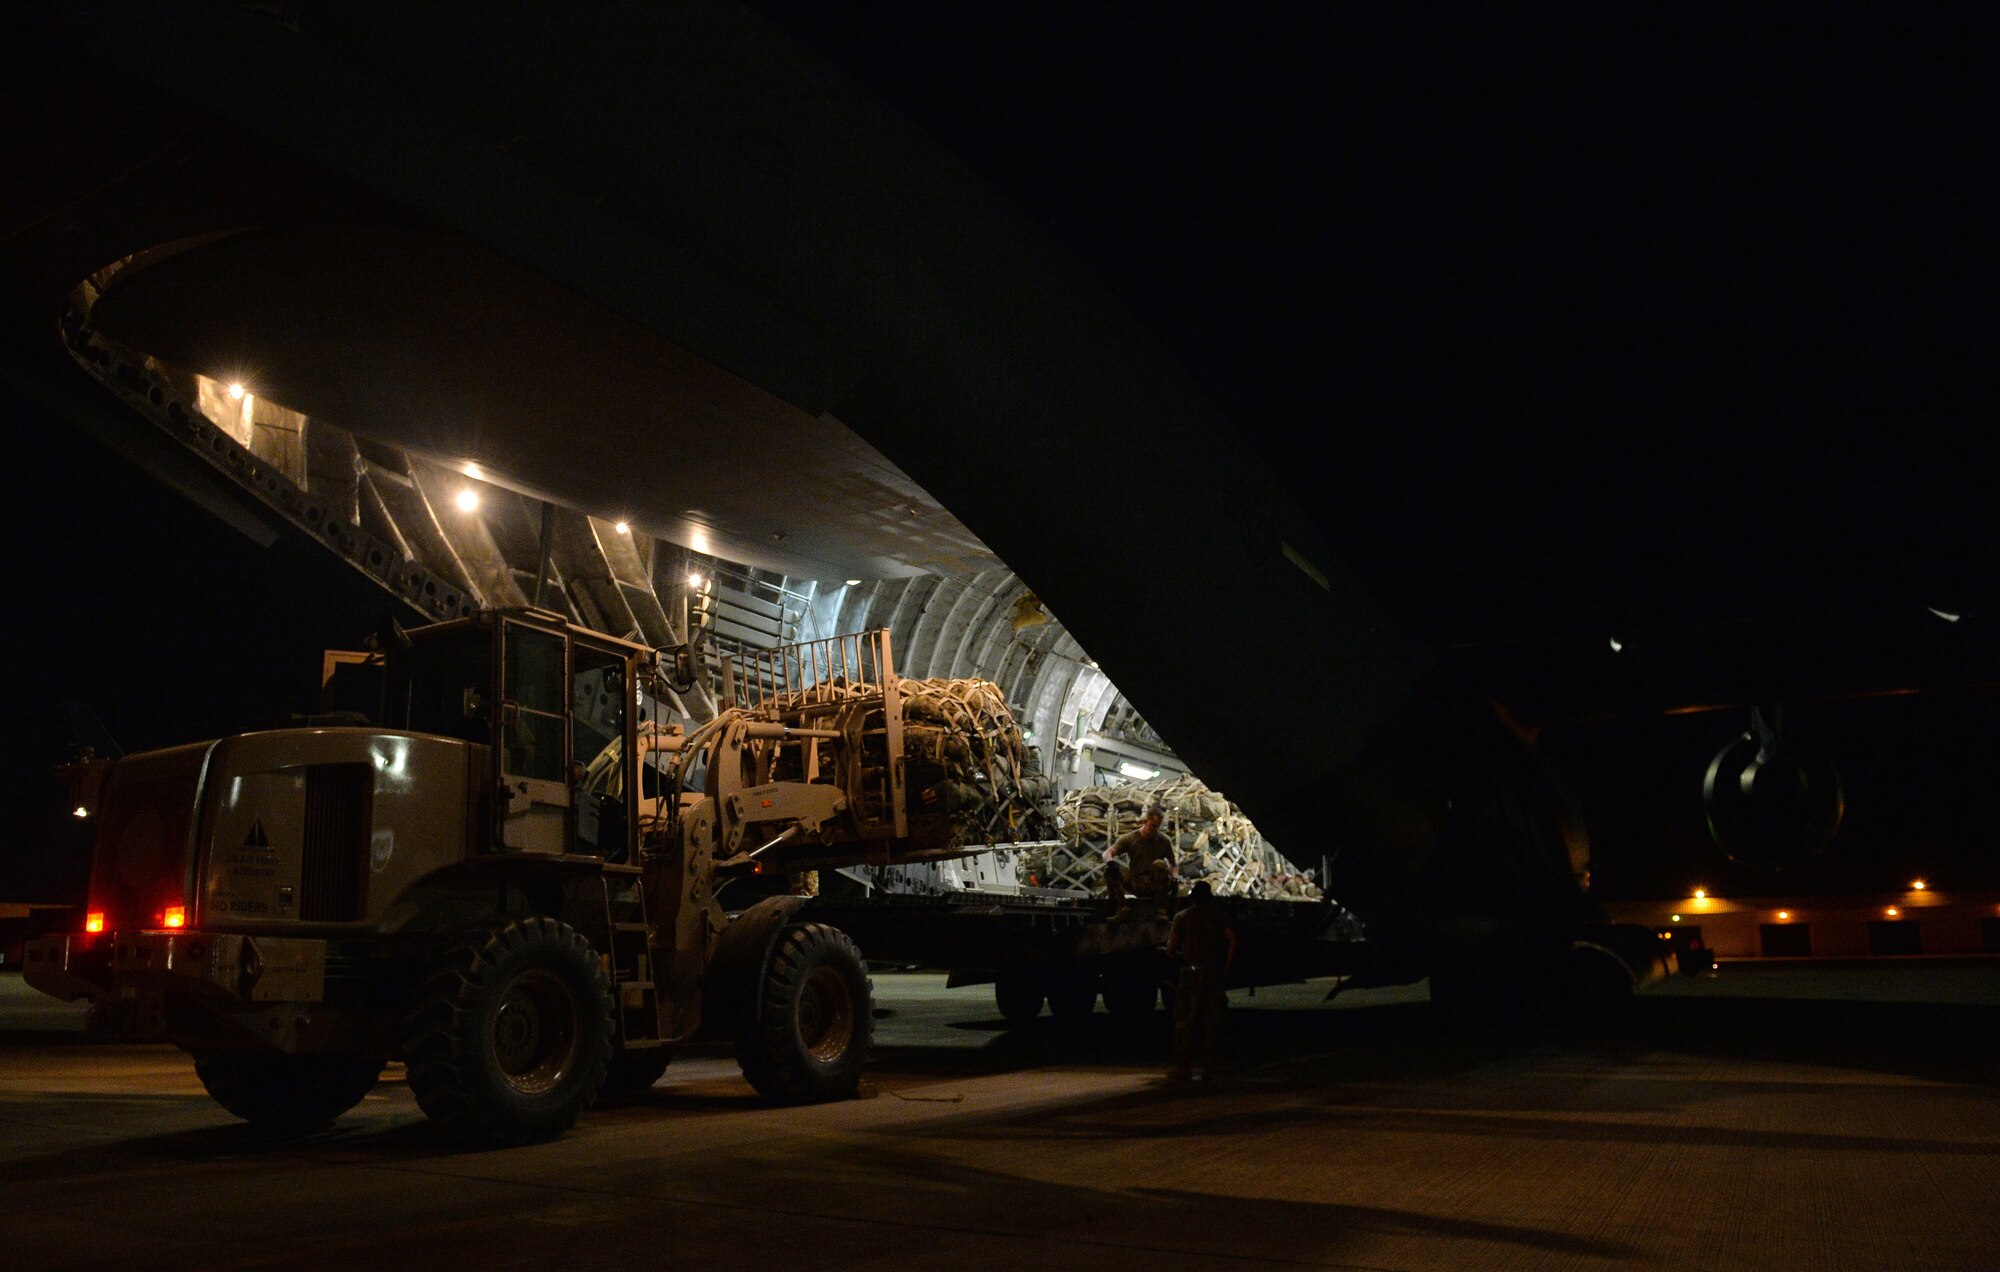 U.S. Air Force Aerial Transportation Specialists with the 378th Aerial Expeditionary Squadron, unload cargo from the back of a C-17 Globemaster III arriving at Prince Sultan Air Base (PSAB), Kingdom of Saudi Arabia (KSA), October 23, 2109.